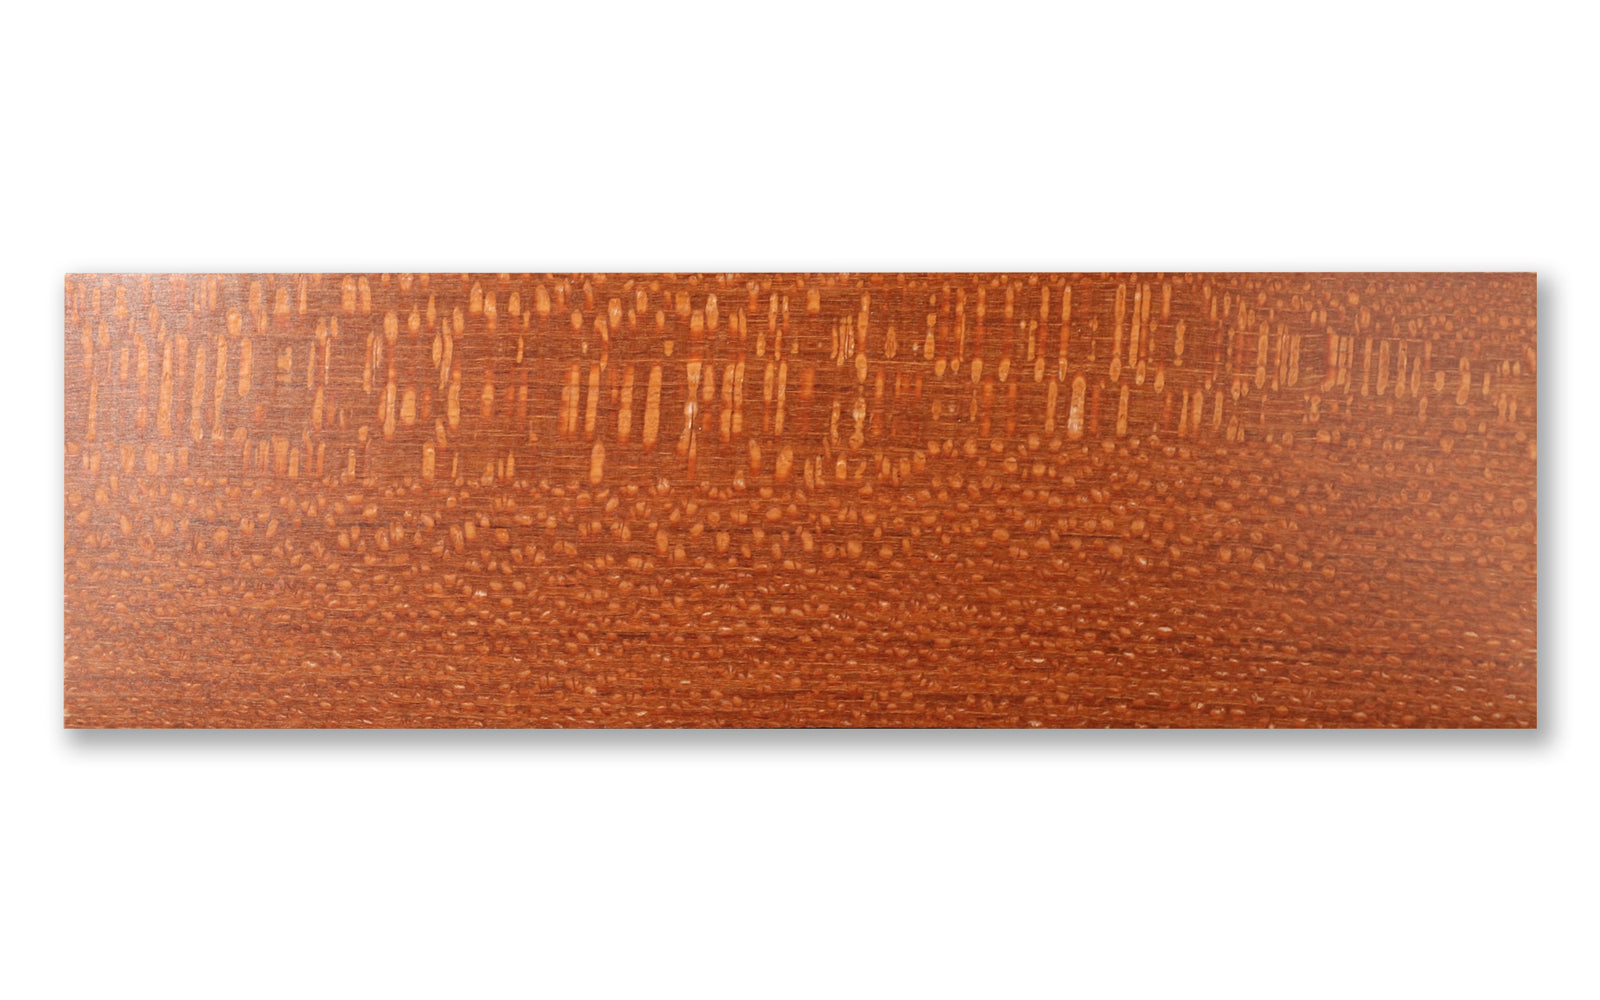 Lacewood 1/8 Inch Solid Wood-Finished